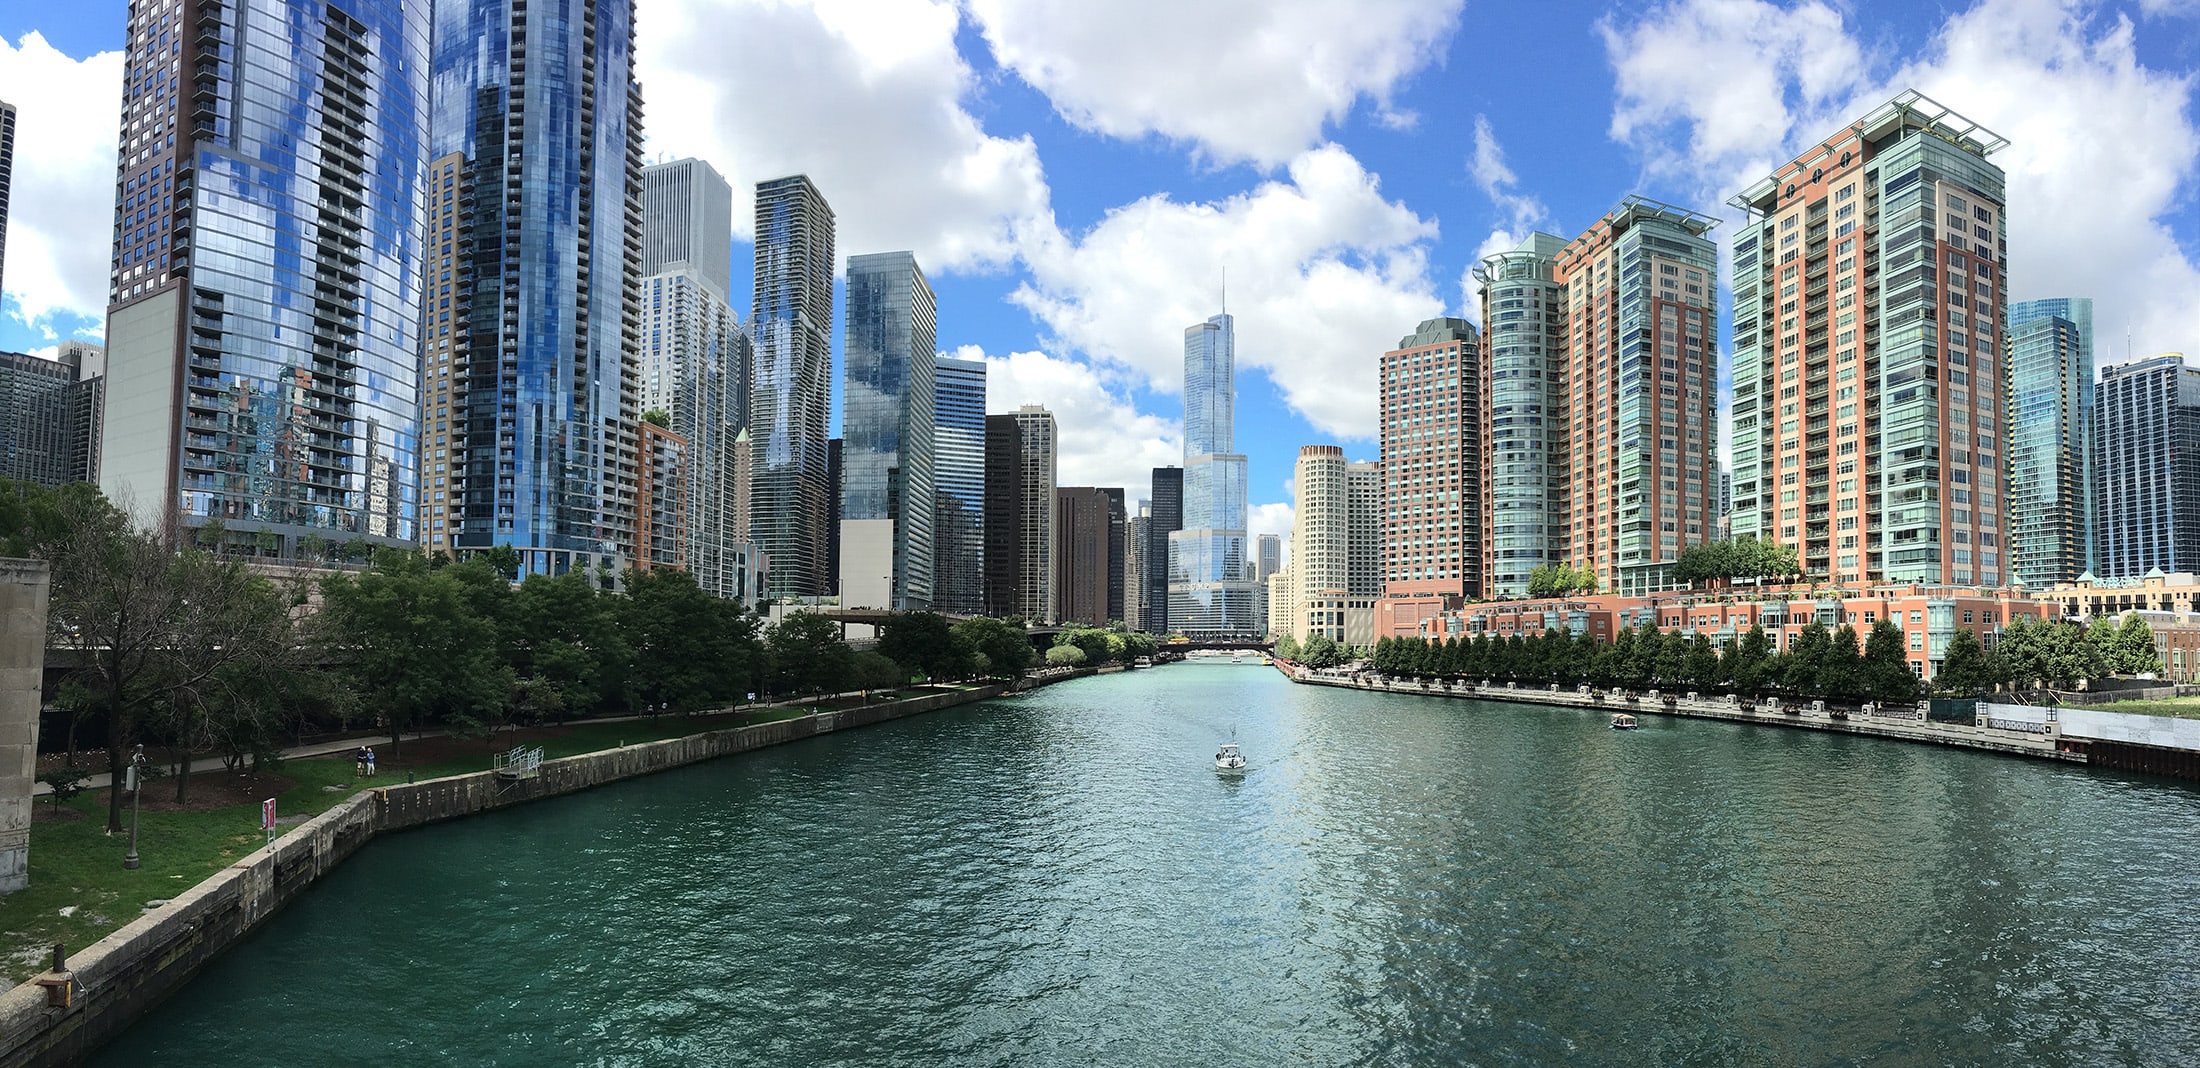 Chicago river background image